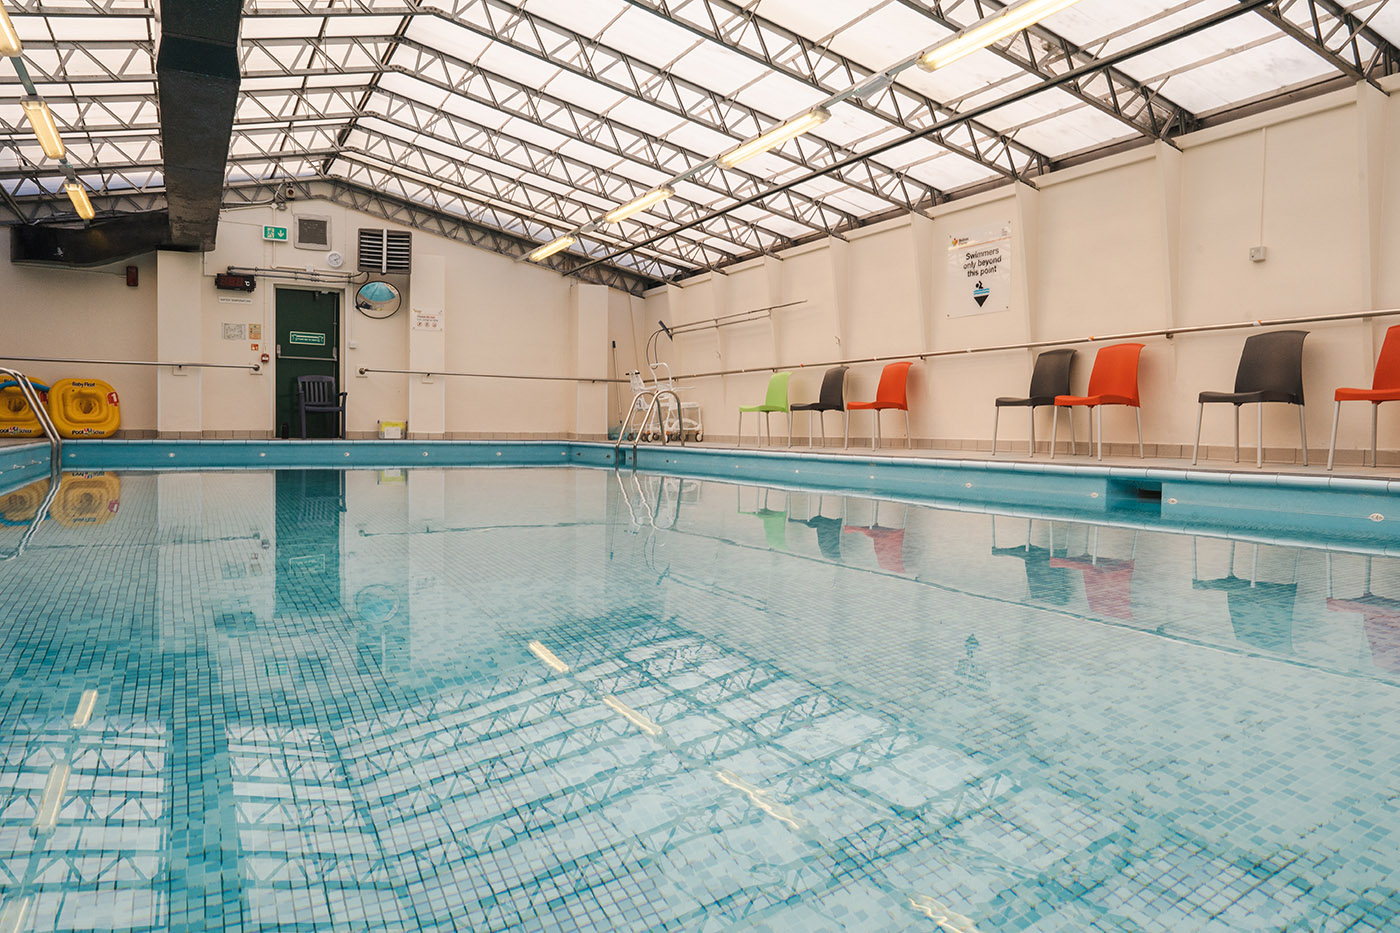 The Jubilee Center Pool